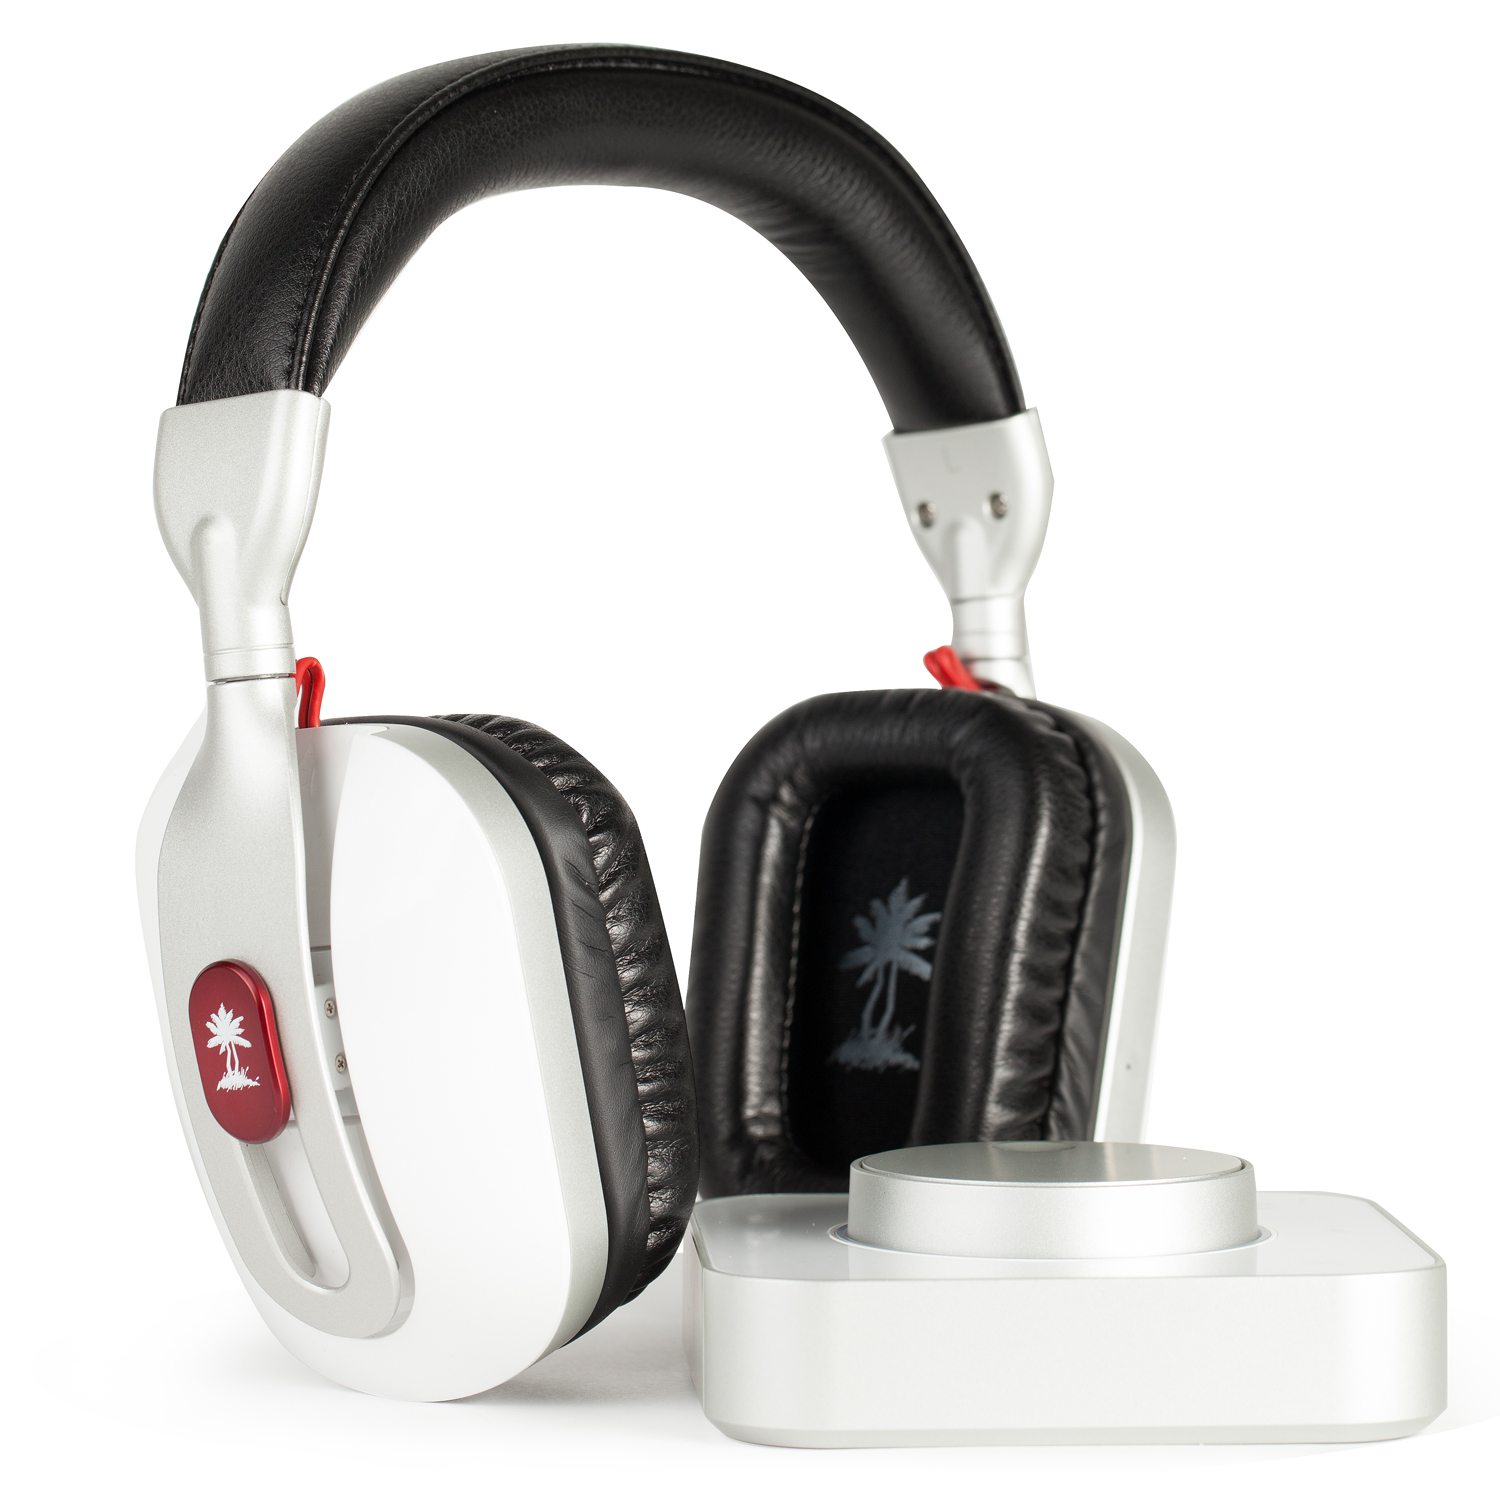 Turtle Beach Ear Force i60 DTS Headphone:X 7.1 surround sound Headset Review